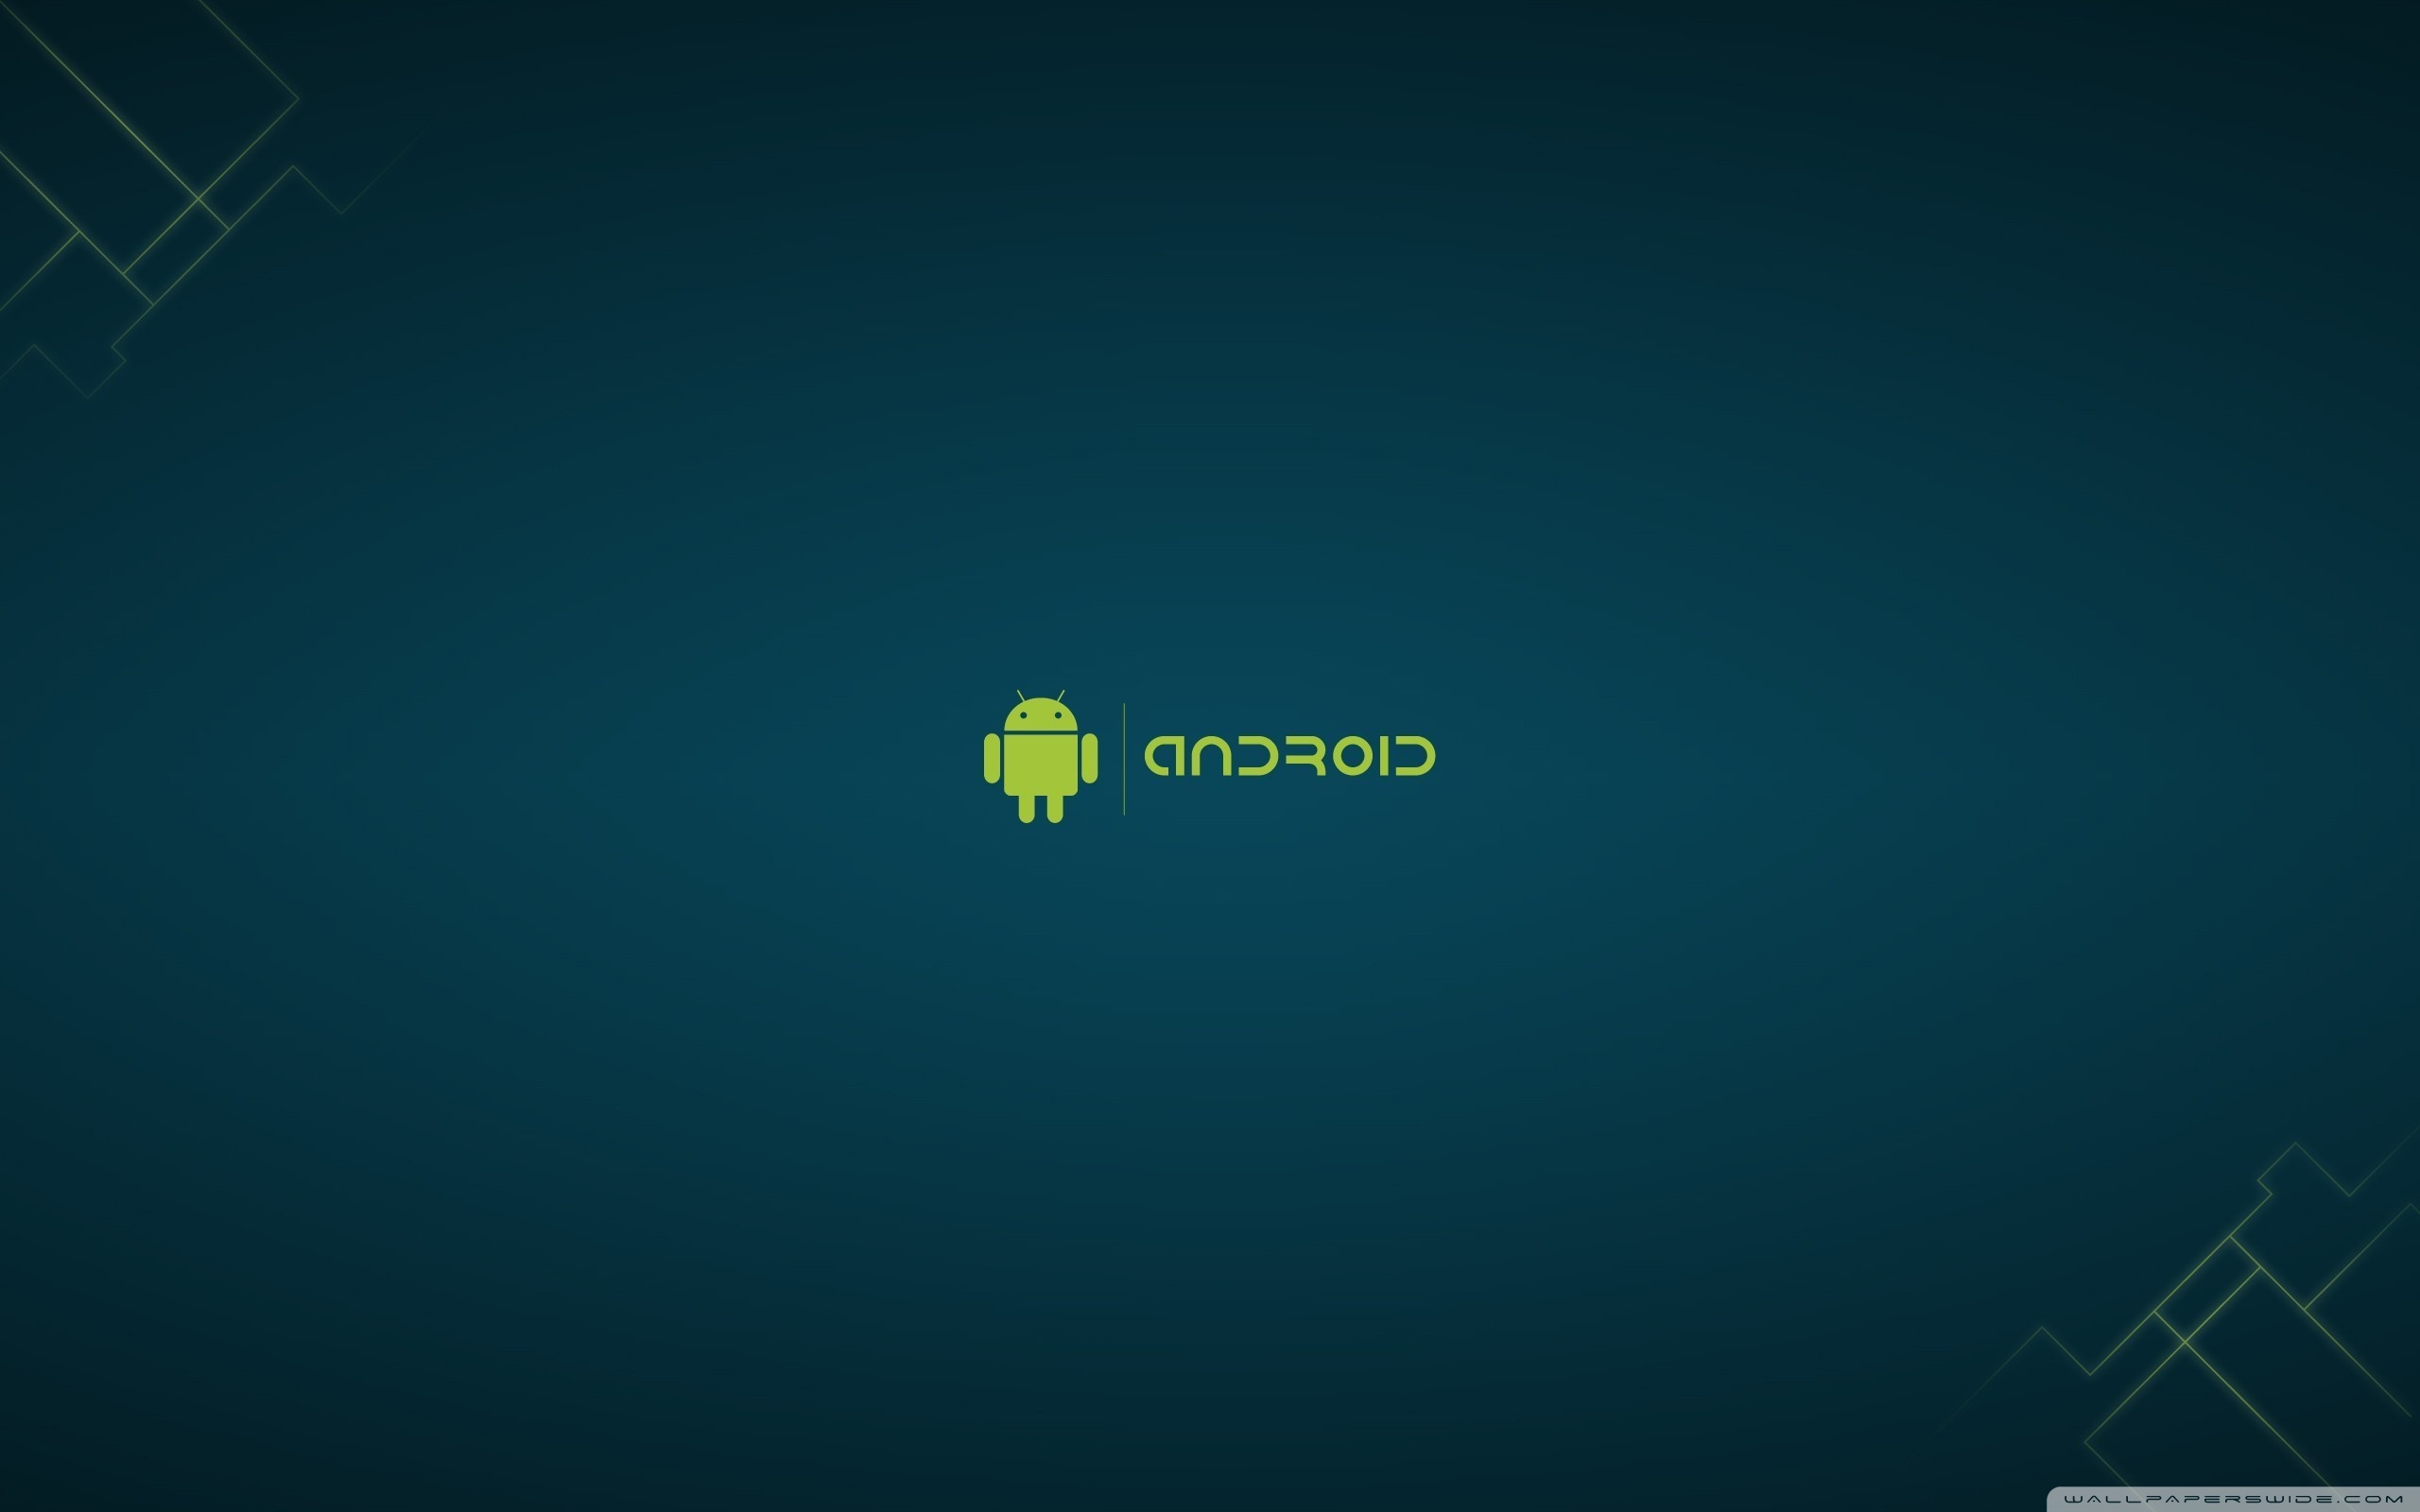 Android background wallpaper